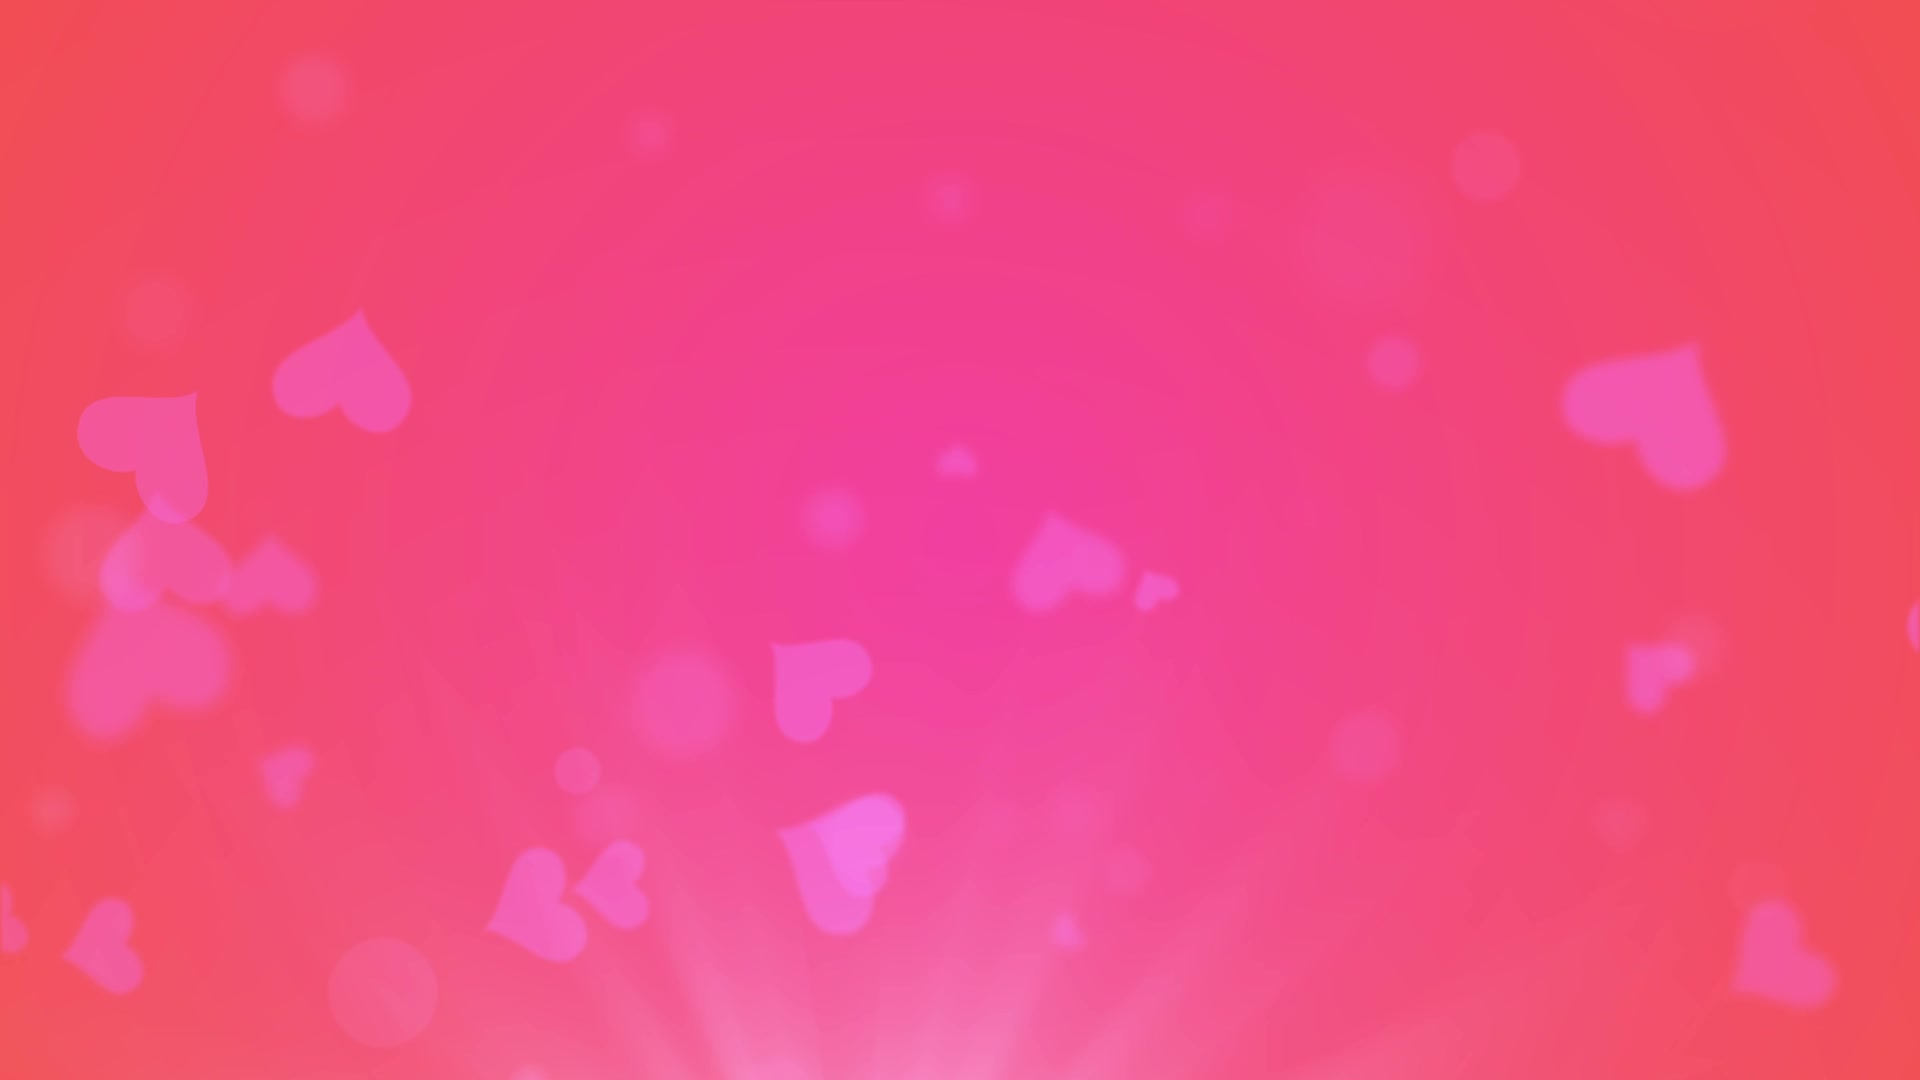 Animated Background Pink Stock Video Footage for Free Download